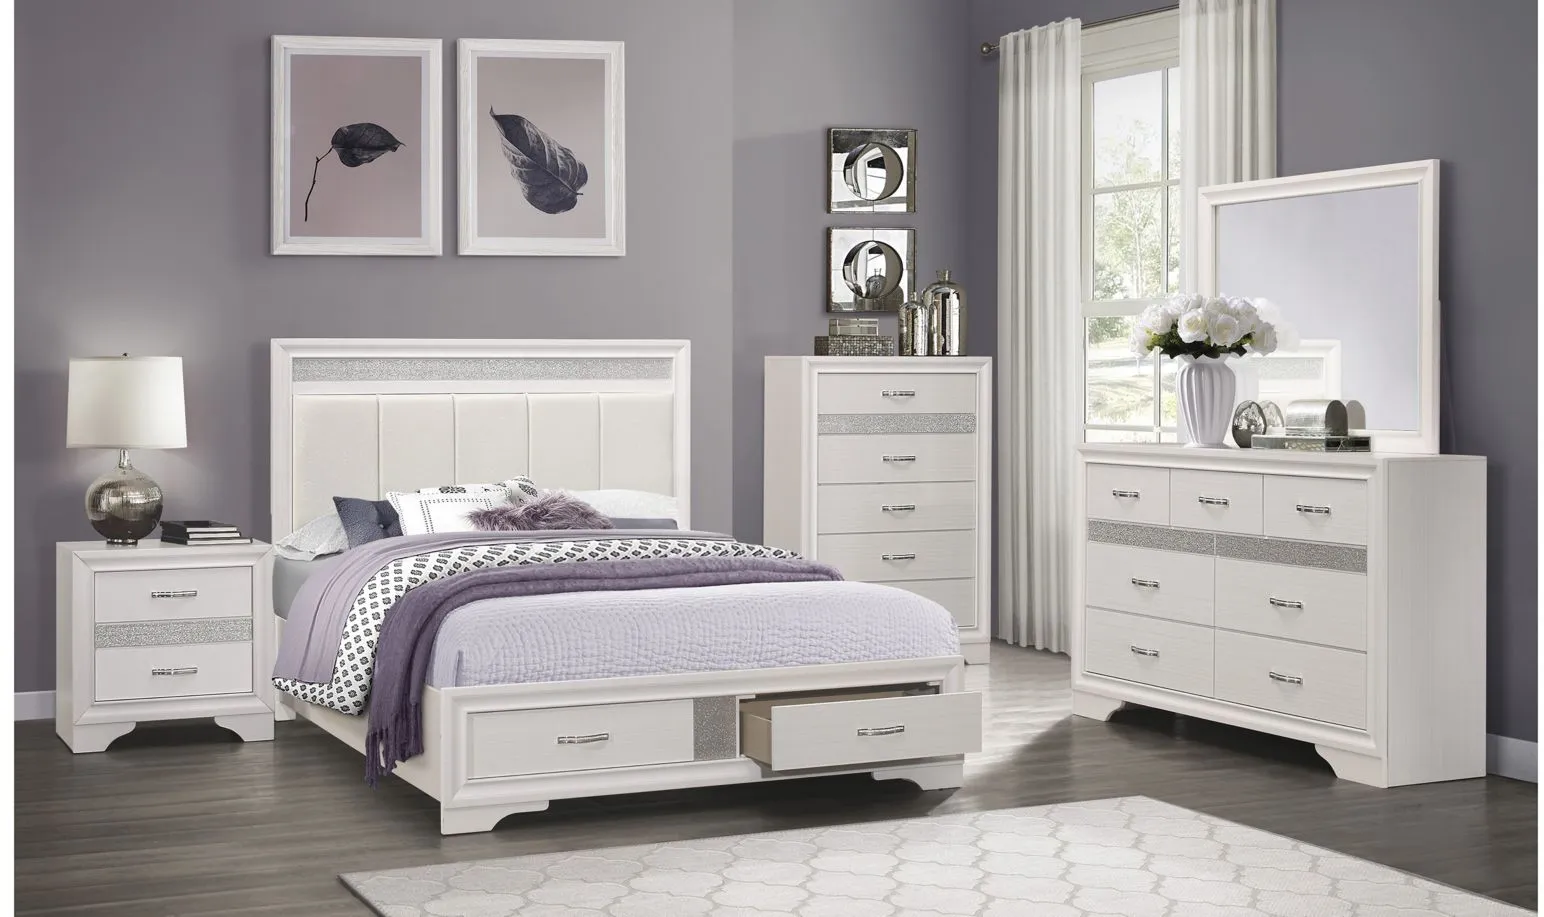 Homelegance Griggs Upholstered Storage Bed in Two-Tone Finish: (White and Silver Glitter) by Homelegance